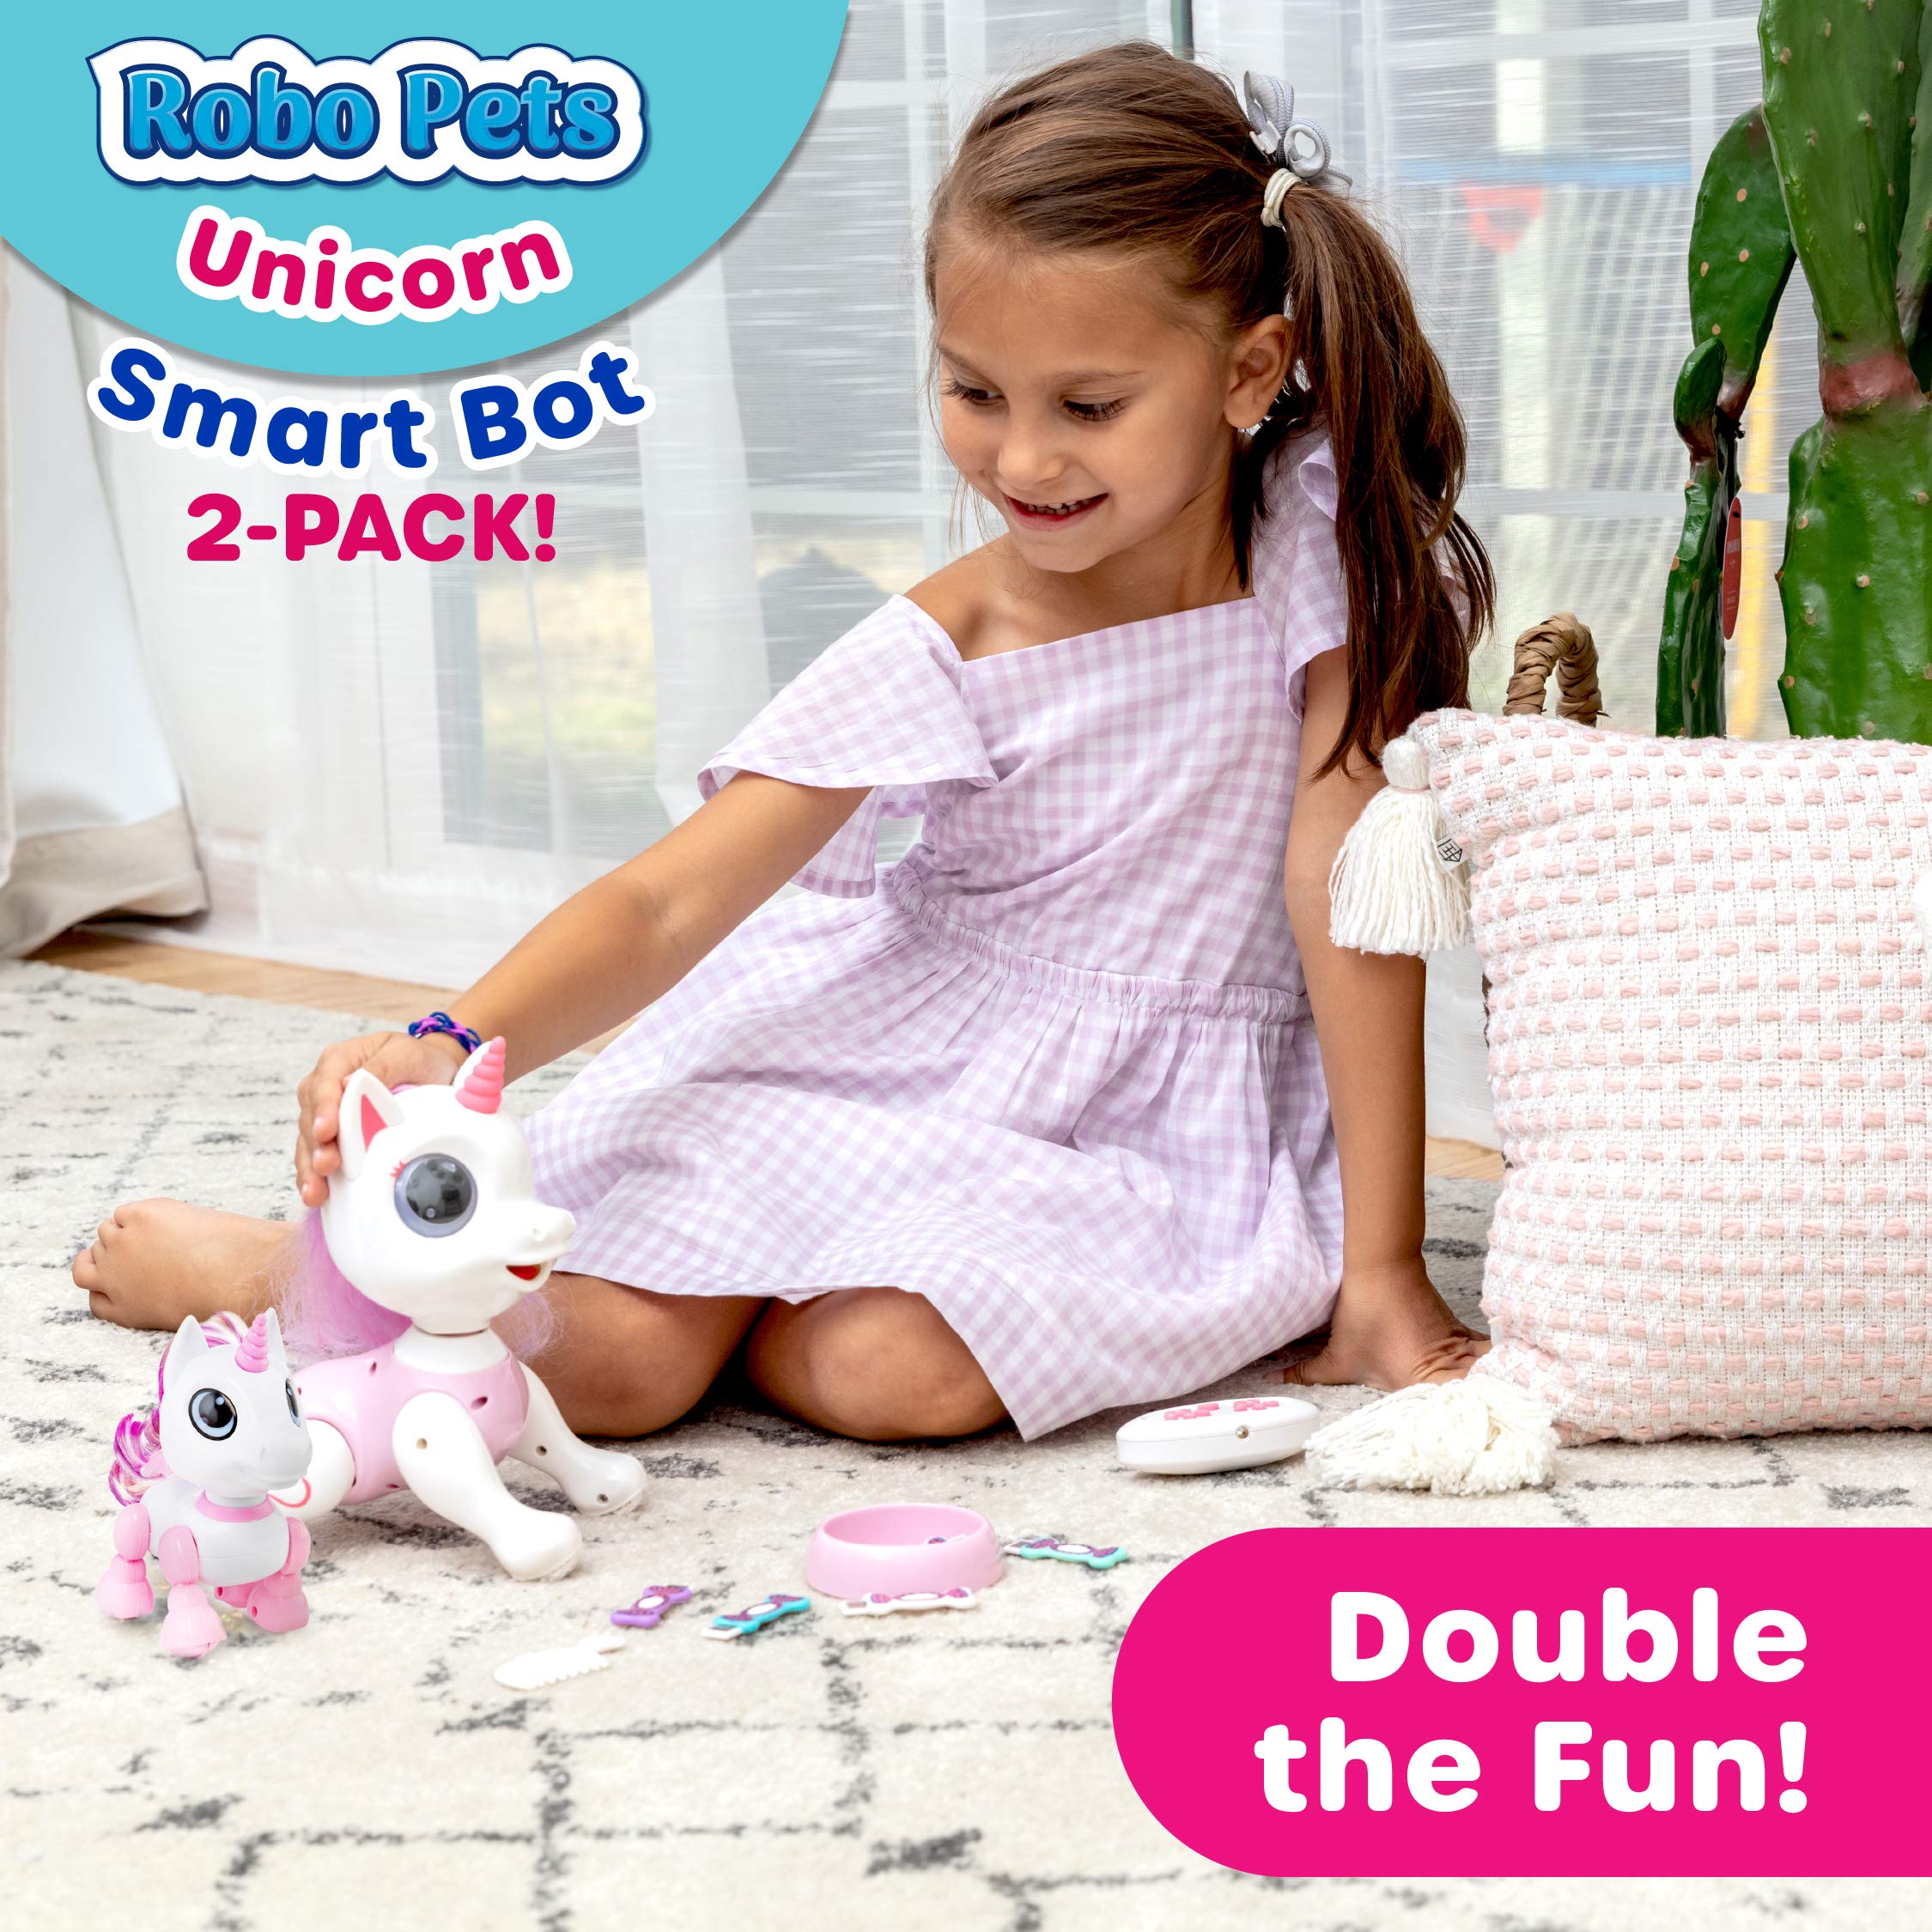 Power Your Fun Robo Pets Unicorn Toys 2pk - Unicorns Gifts for Girls and Kids (1) Unicorn STEM Toy Robot Interactive Hand Gestures or Remote Control to Move and (1) Mini Unicorn Automated Smart Robot